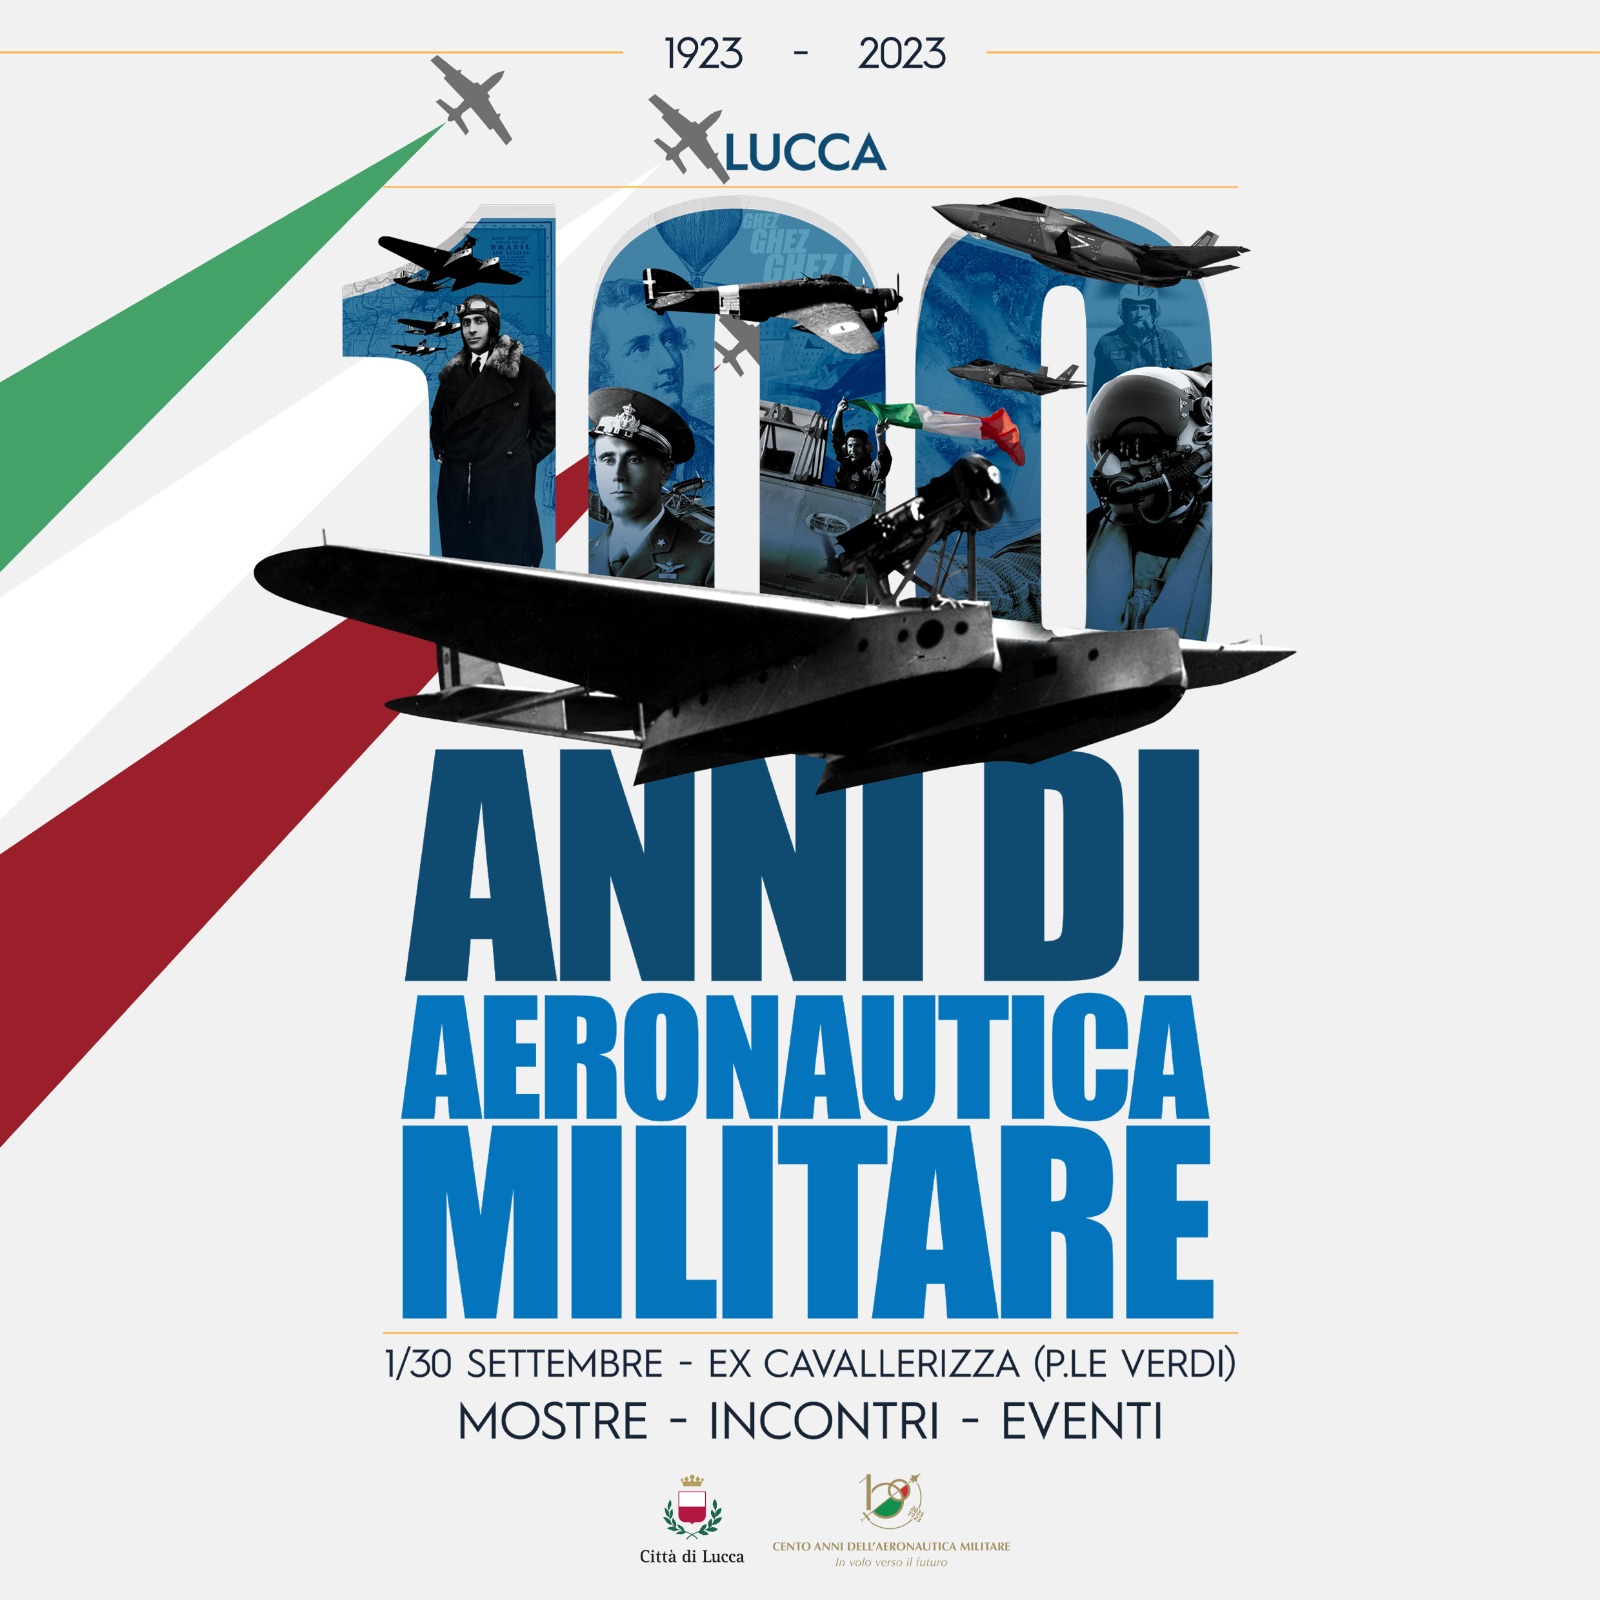 100 years of the Italian air force - celebrations